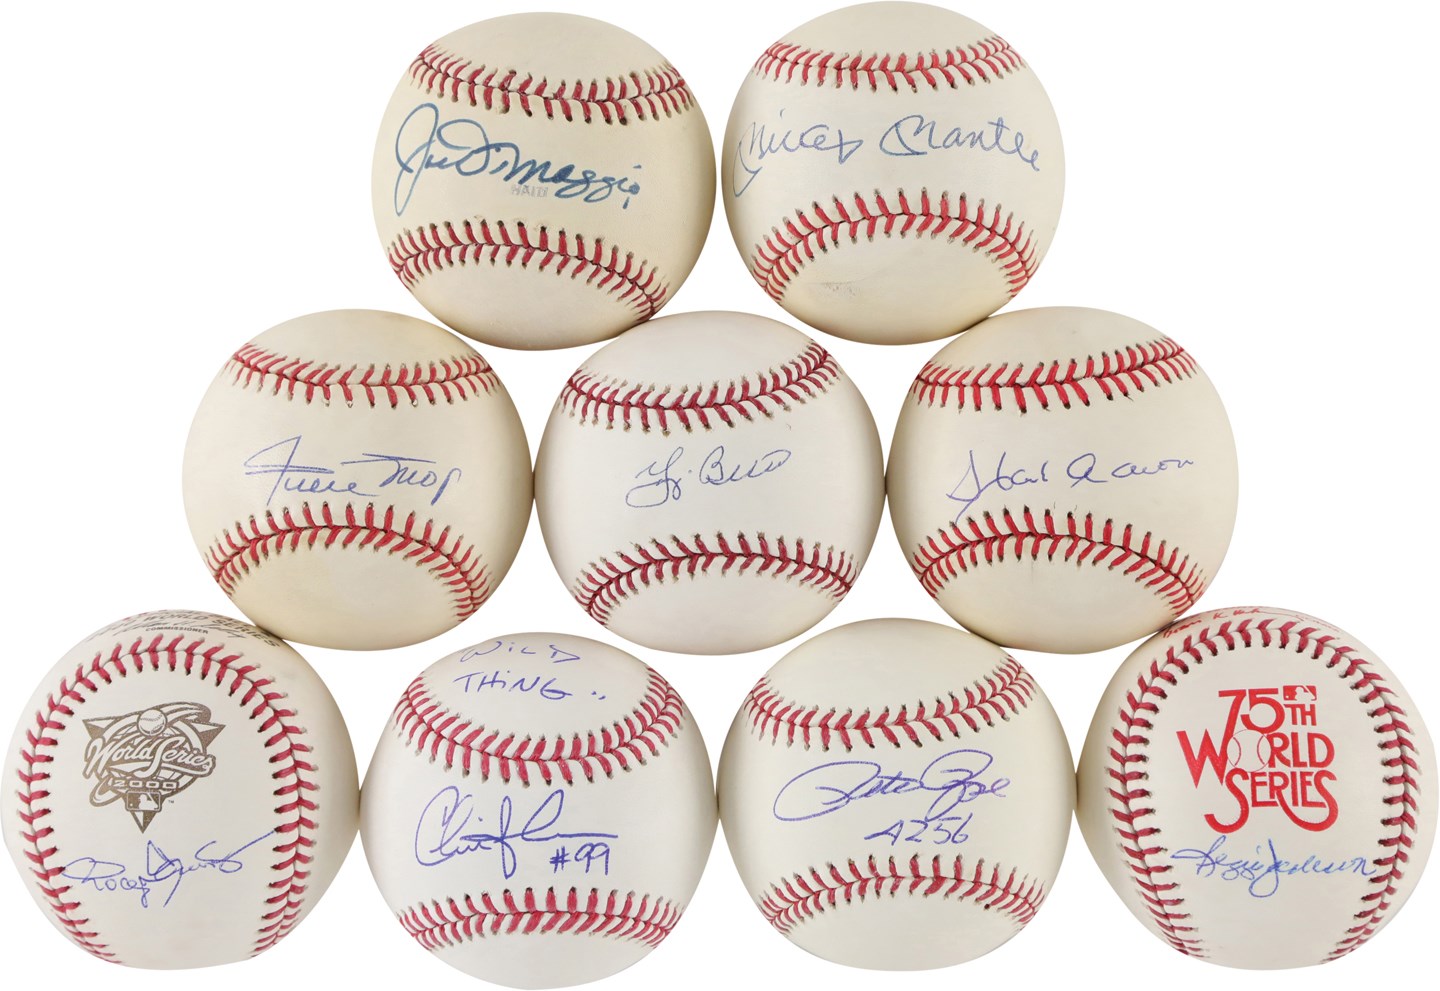 - Hall of Famers and Stars Single Signed Baseballs w/Mantle & DiMaggio (9)